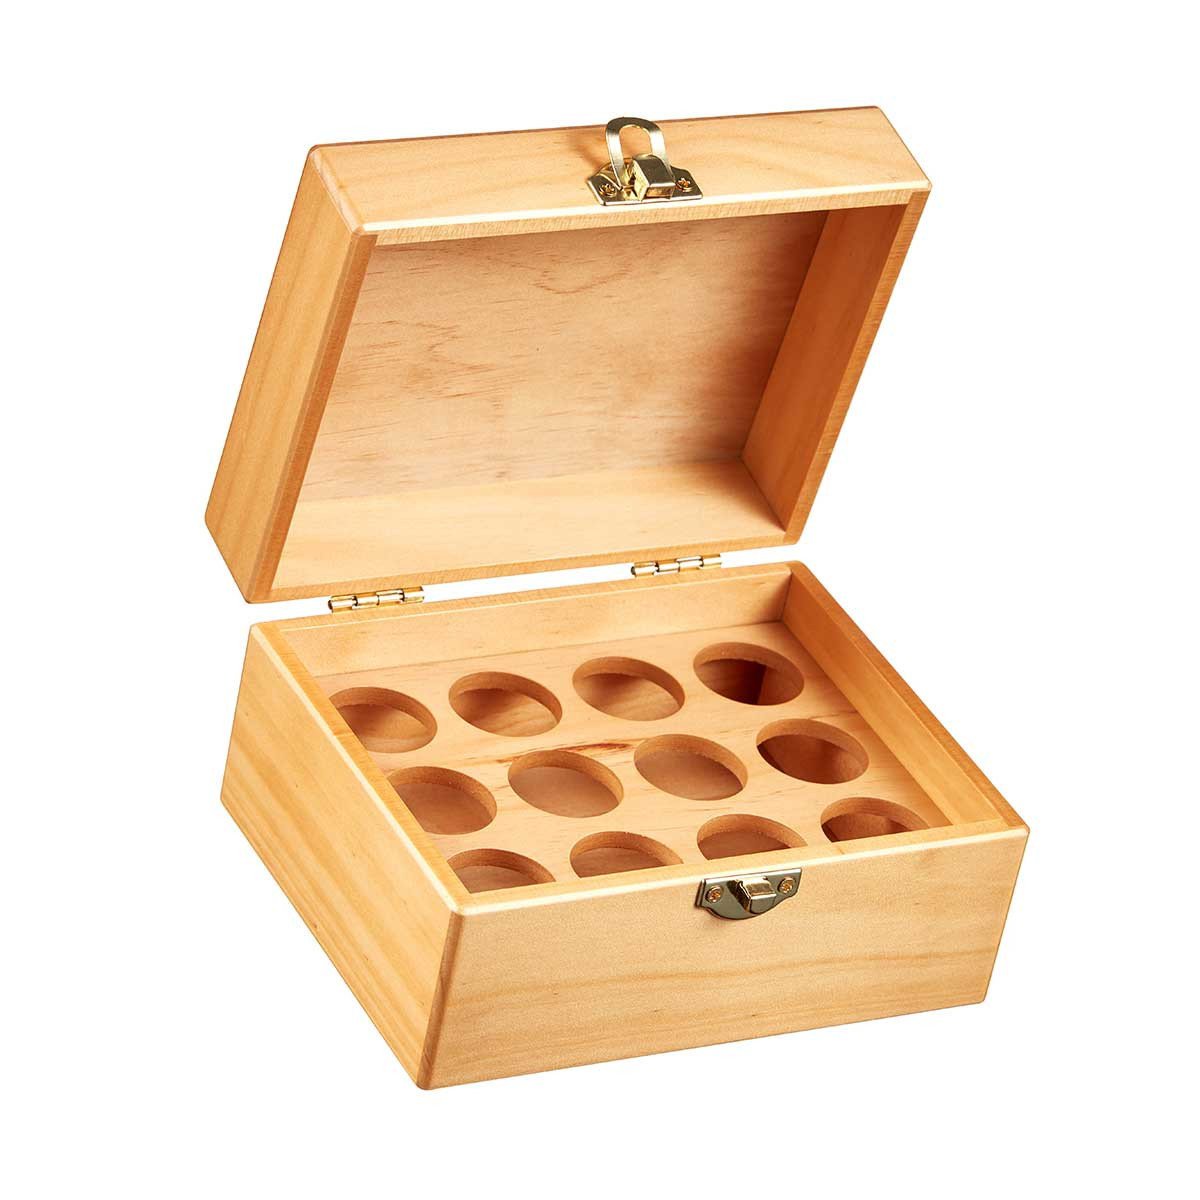  FOMIYES Box Essential Oil Box Essential Oil Container Essential  Oils Case Oil for Diffuser Essential Oils Aromatherapy Bottles Storage Case  Wooden Essential Oil Bag Nail Polish : Health & Household